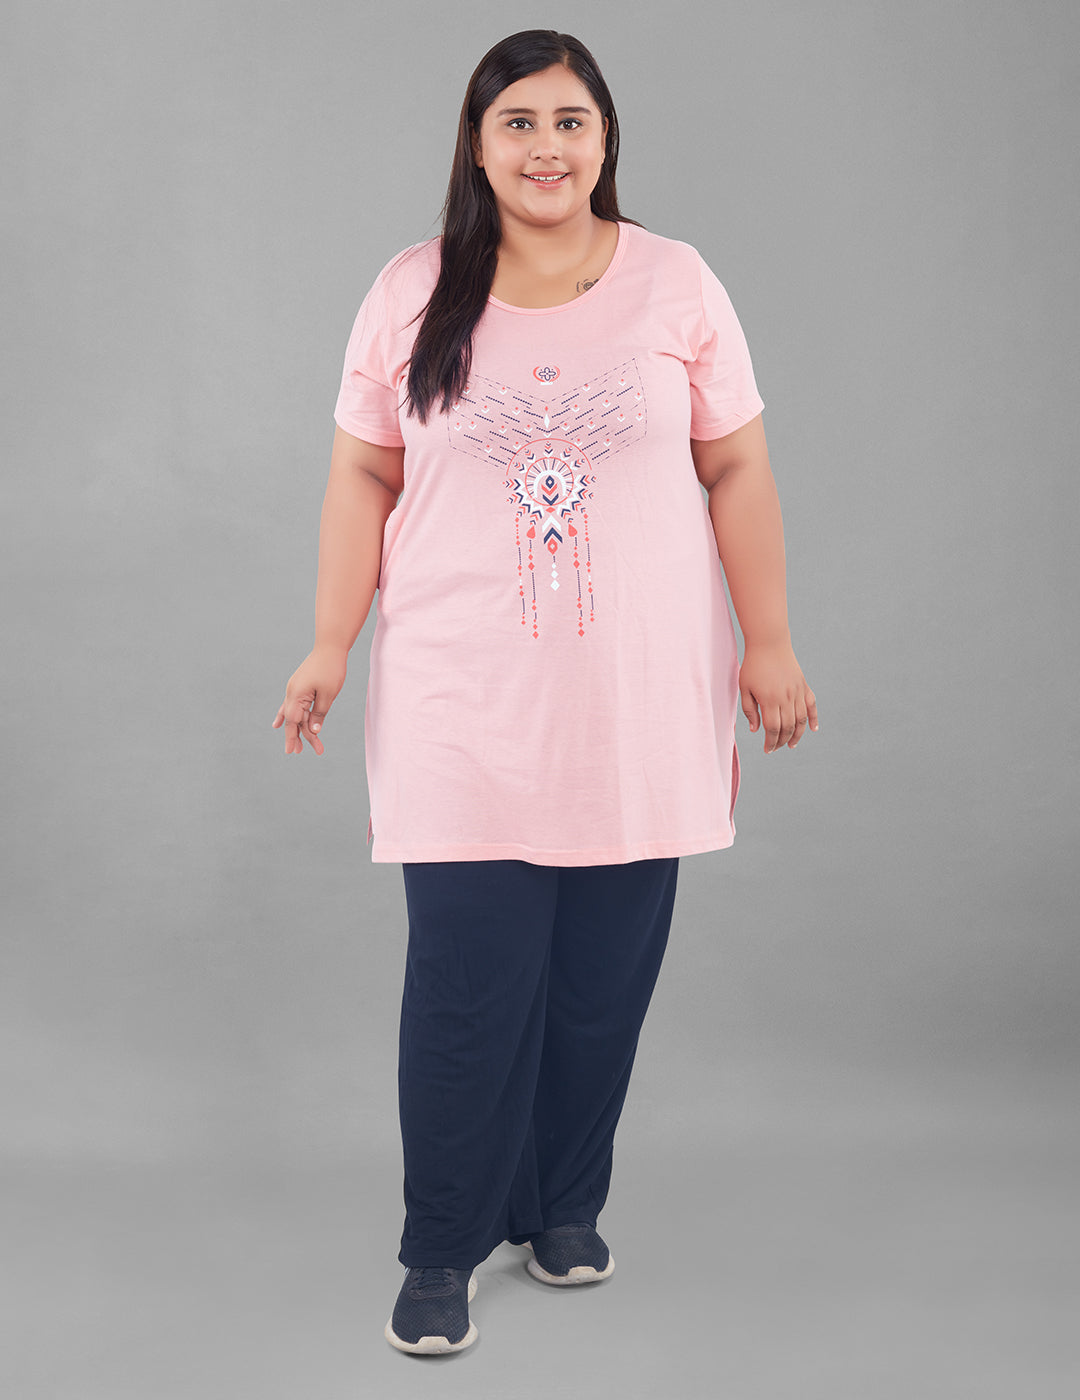 Plus Size Long T-shirts For Women - Half Sleeve - Pack of 2 (Denim Blue & Pink)